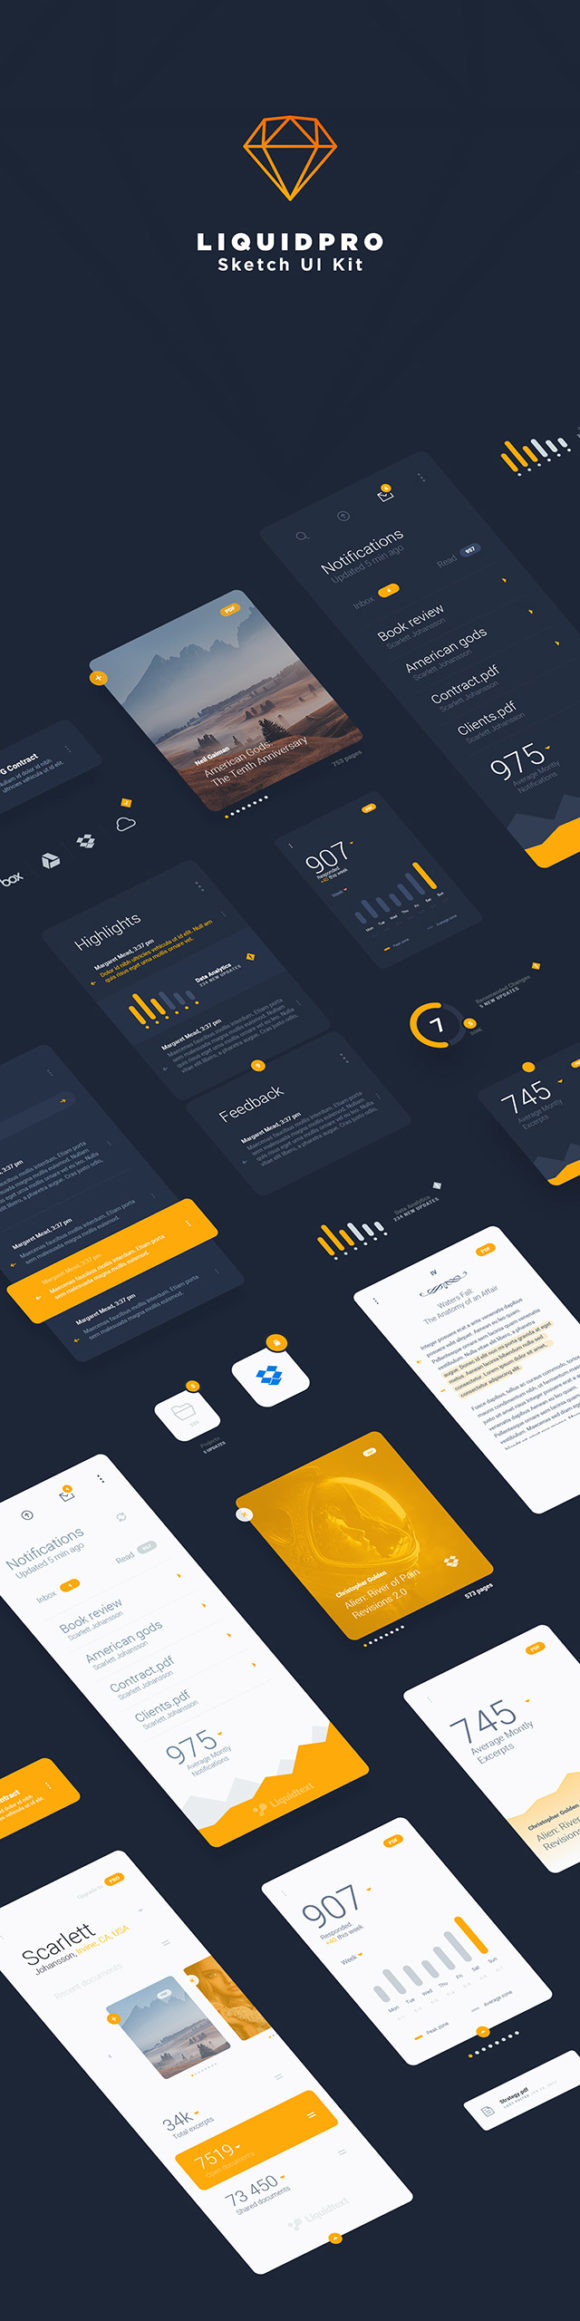 Full preview of LiquidPro Sketch UI kit